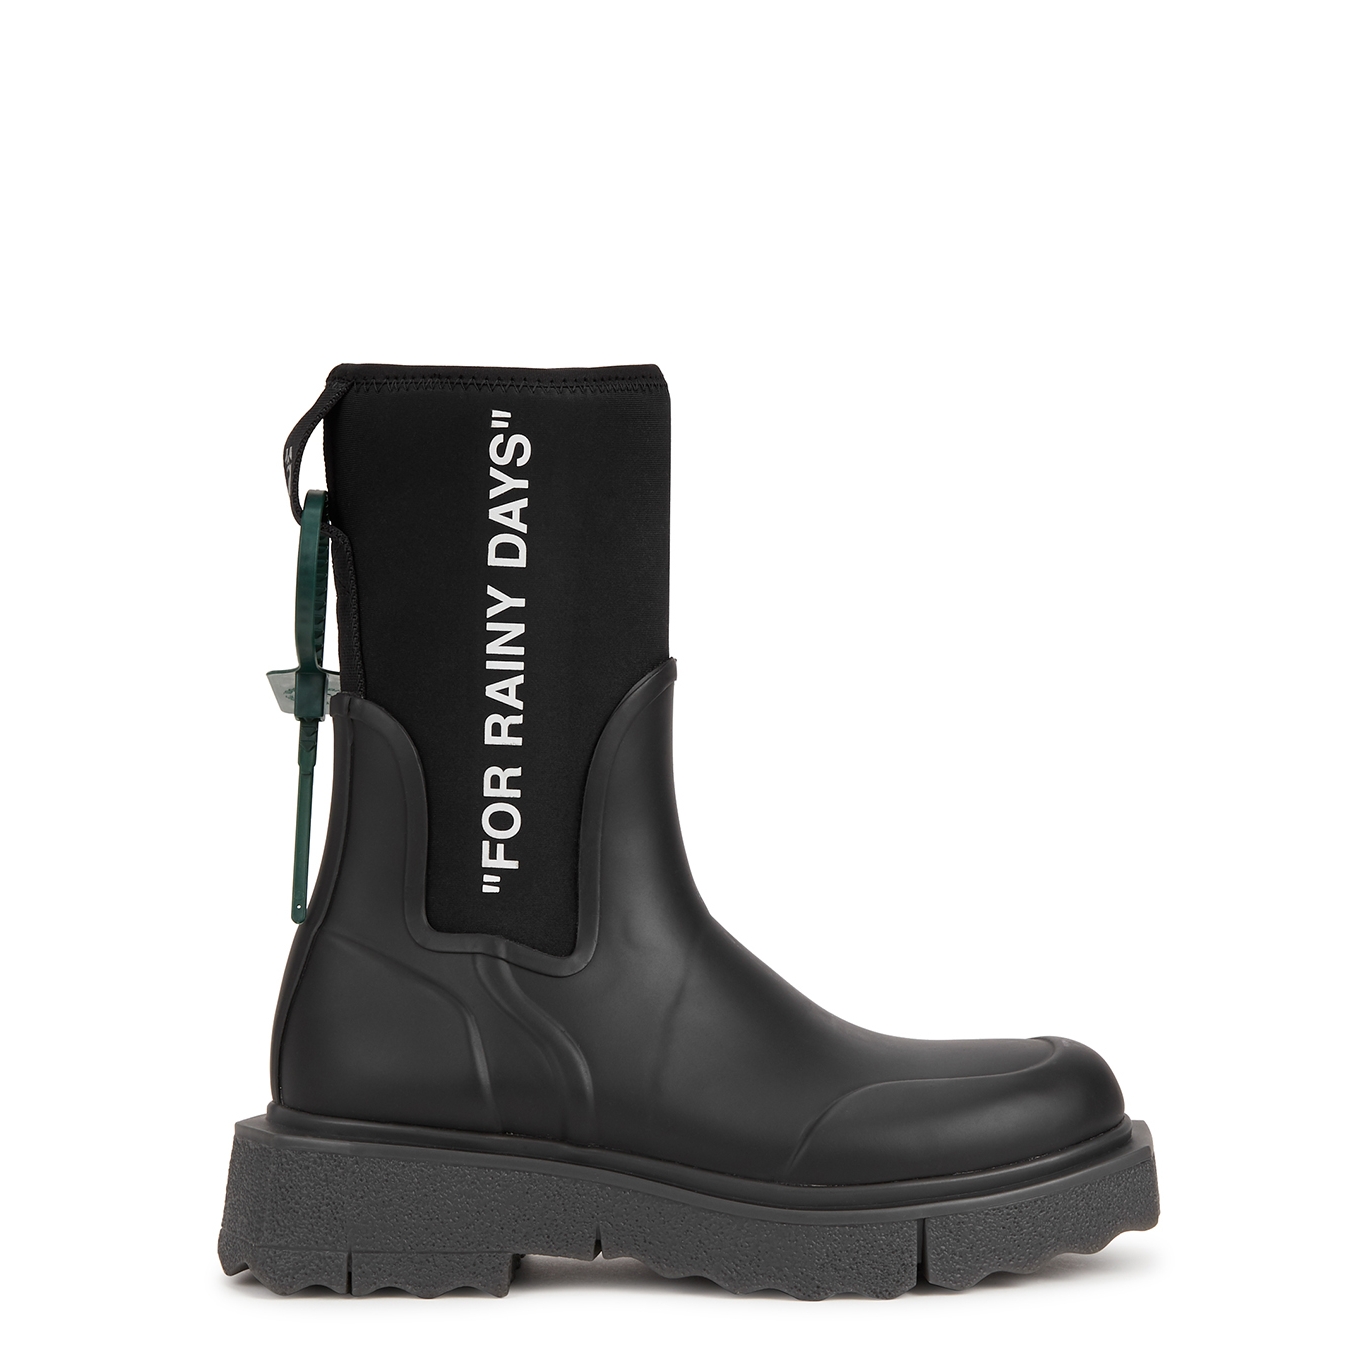 Off-White Printed Neoprene And Rubber Ankle Boots - Black - 4